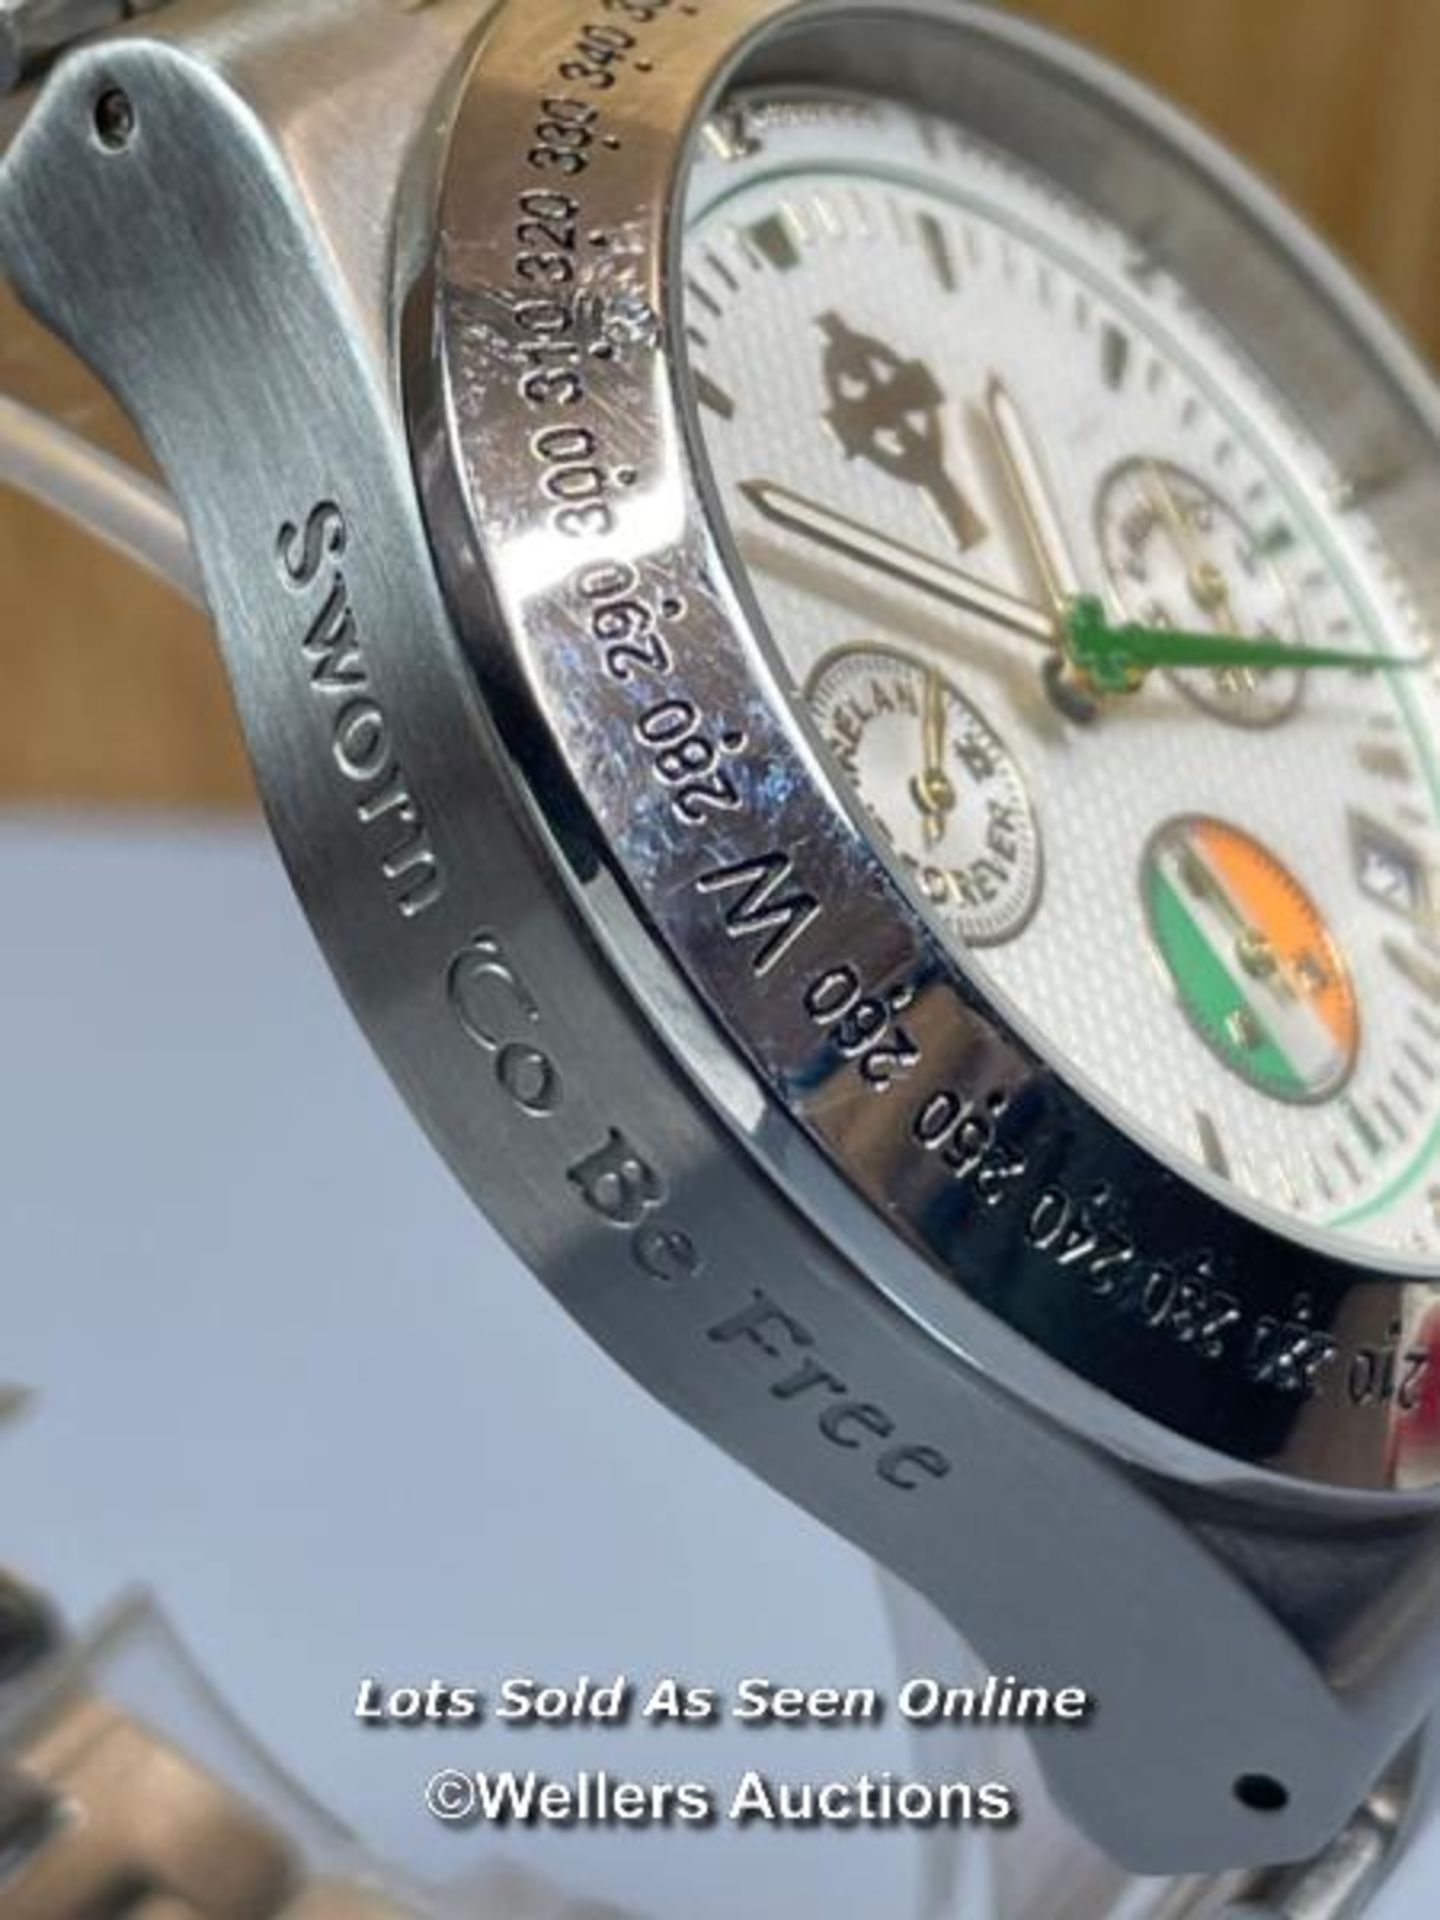 ERIN GO BRAGH GENTS WATCH LIMITED EDITION NO.1372 / 4999, GUINESS LOGO ON THE BRACELET - Image 3 of 5